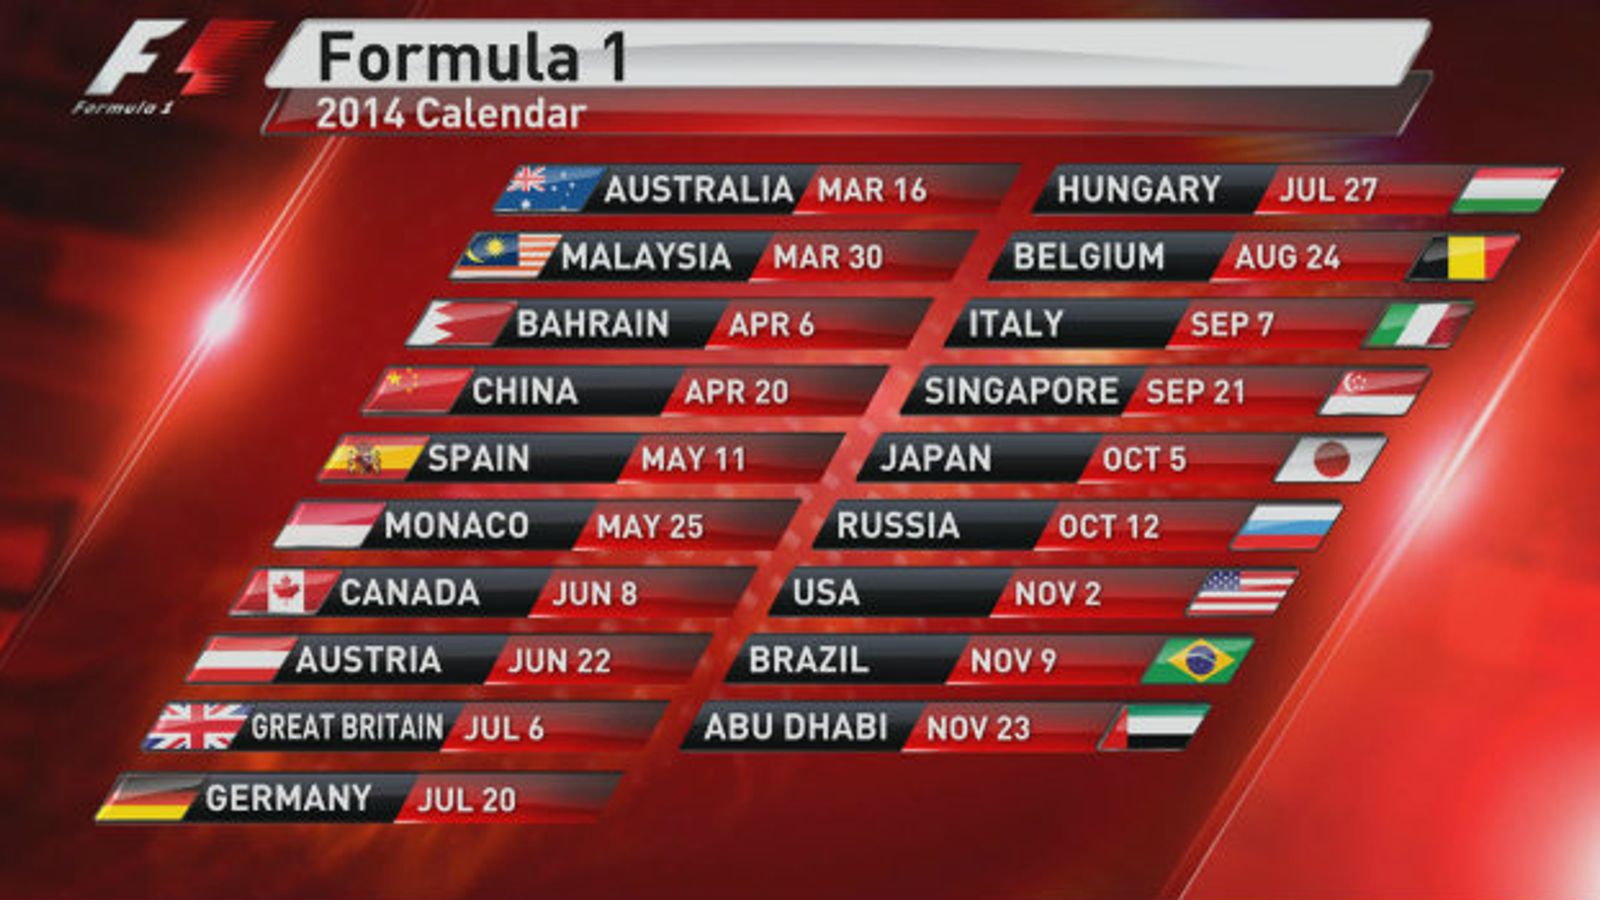 F1 in 2014 The driver line-ups, car launches and test and race schedules for next season F1 News